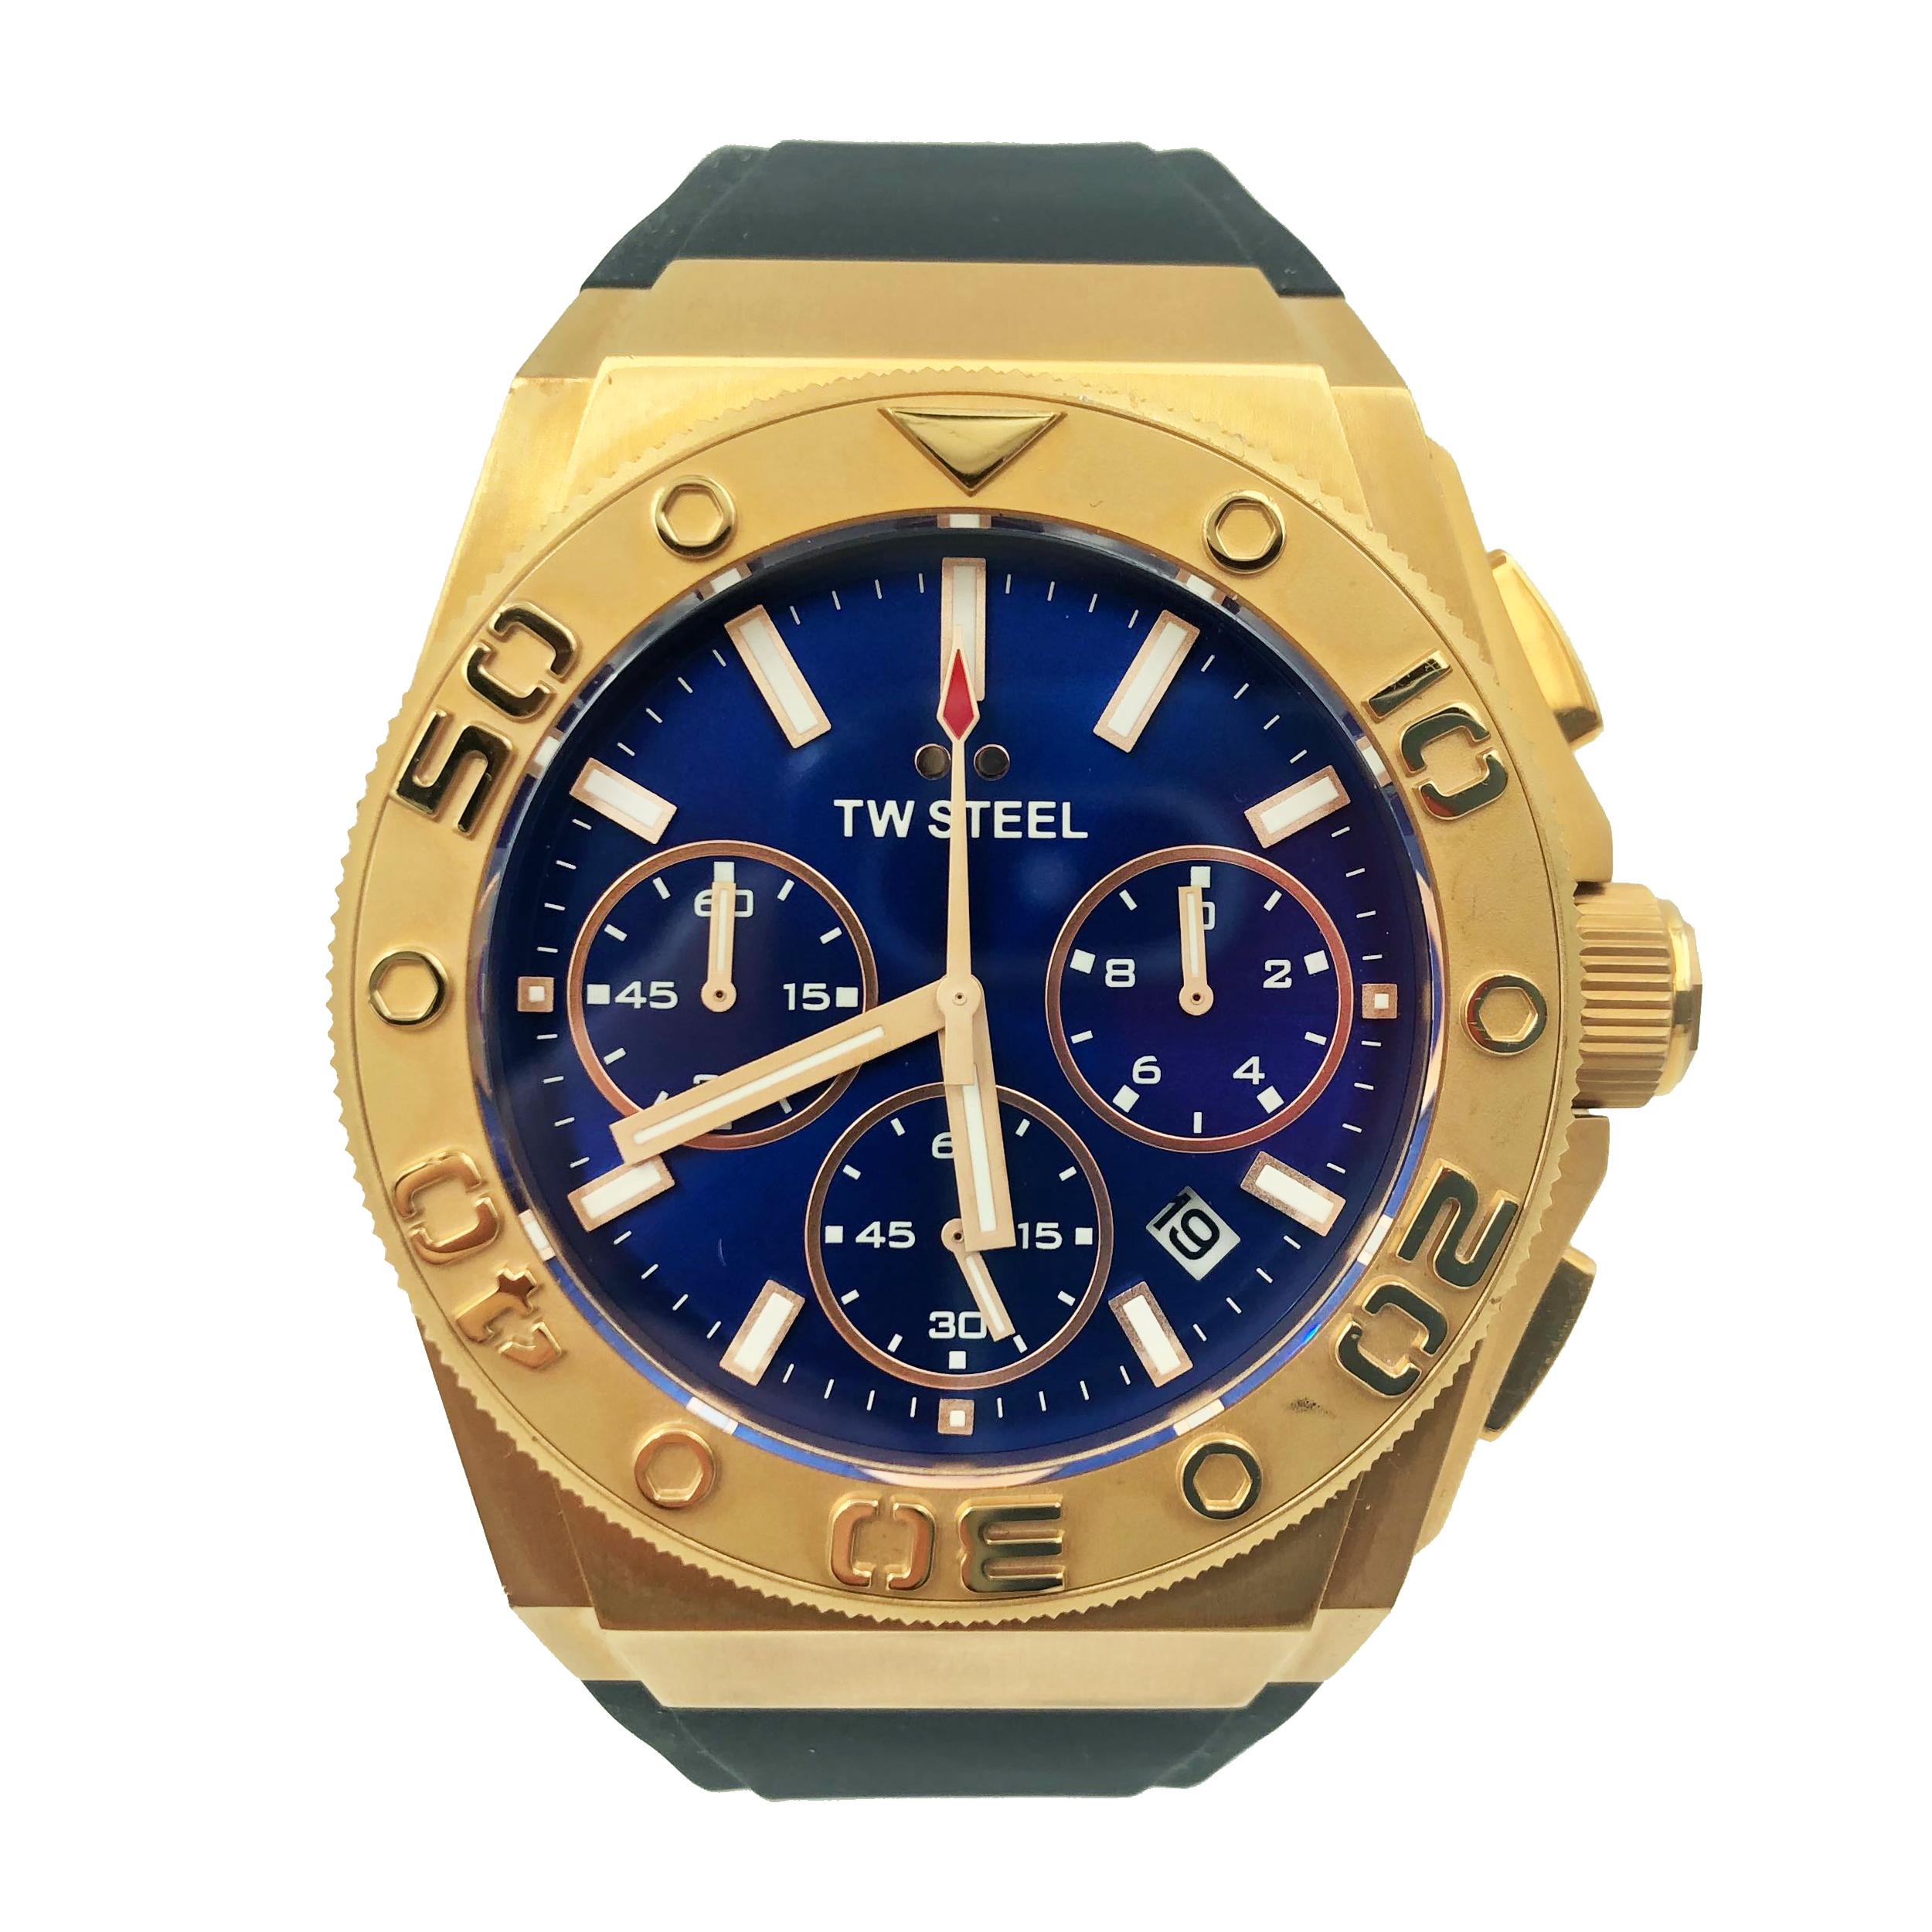 Timepiece has some scratches and dings on the left side of the case.
Details:
Model Number CE5010
Brand TW Steel
Department Men
Band Color Blue
Dial Color Blue
Case Color Yellow
Display Analog
Dial Style Non-Numeric Hour Marks
Case Size 43 mm
Watch